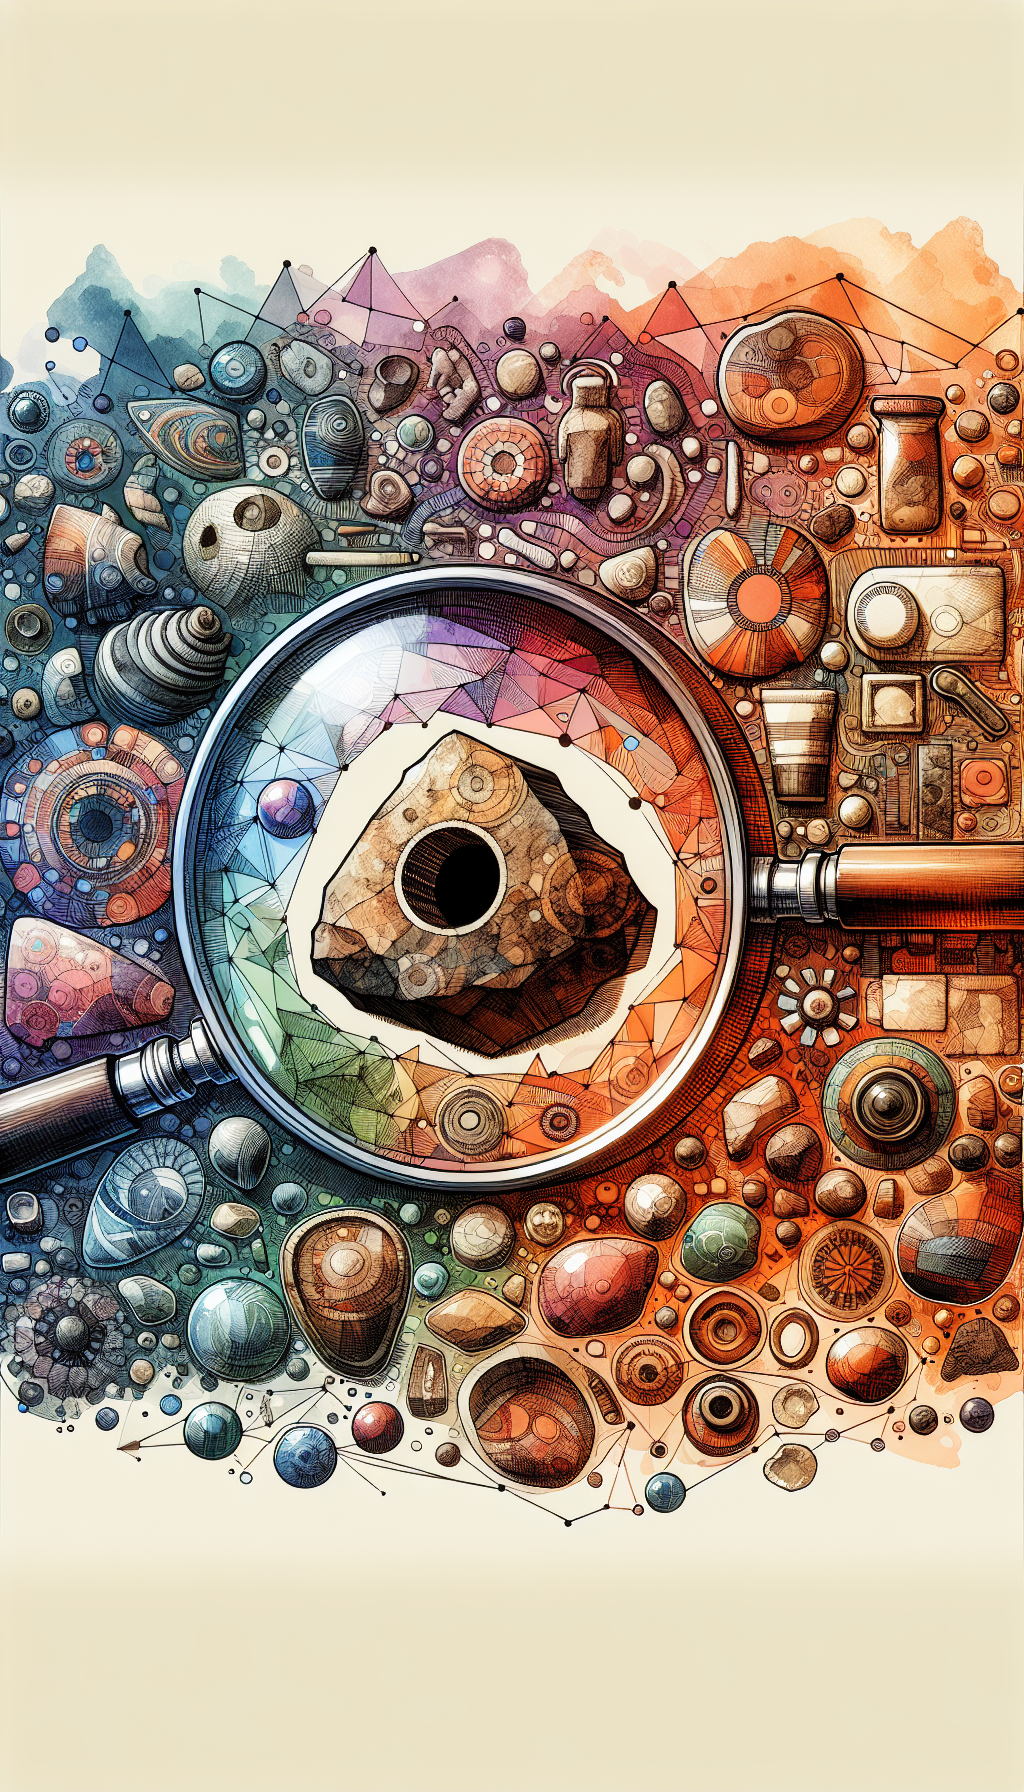 An illustration featuring a vibrant collage of fragmented Indian artifacts, with a magnifying glass centering on a rock with a perfectly round hole. Amidst the fragments, a translucent timeline flows through, with dates and methods like carbon dating and pottery analysis interwoven. Varied styles from watercolor to line art symbolize the diverse techniques in artifact identification.